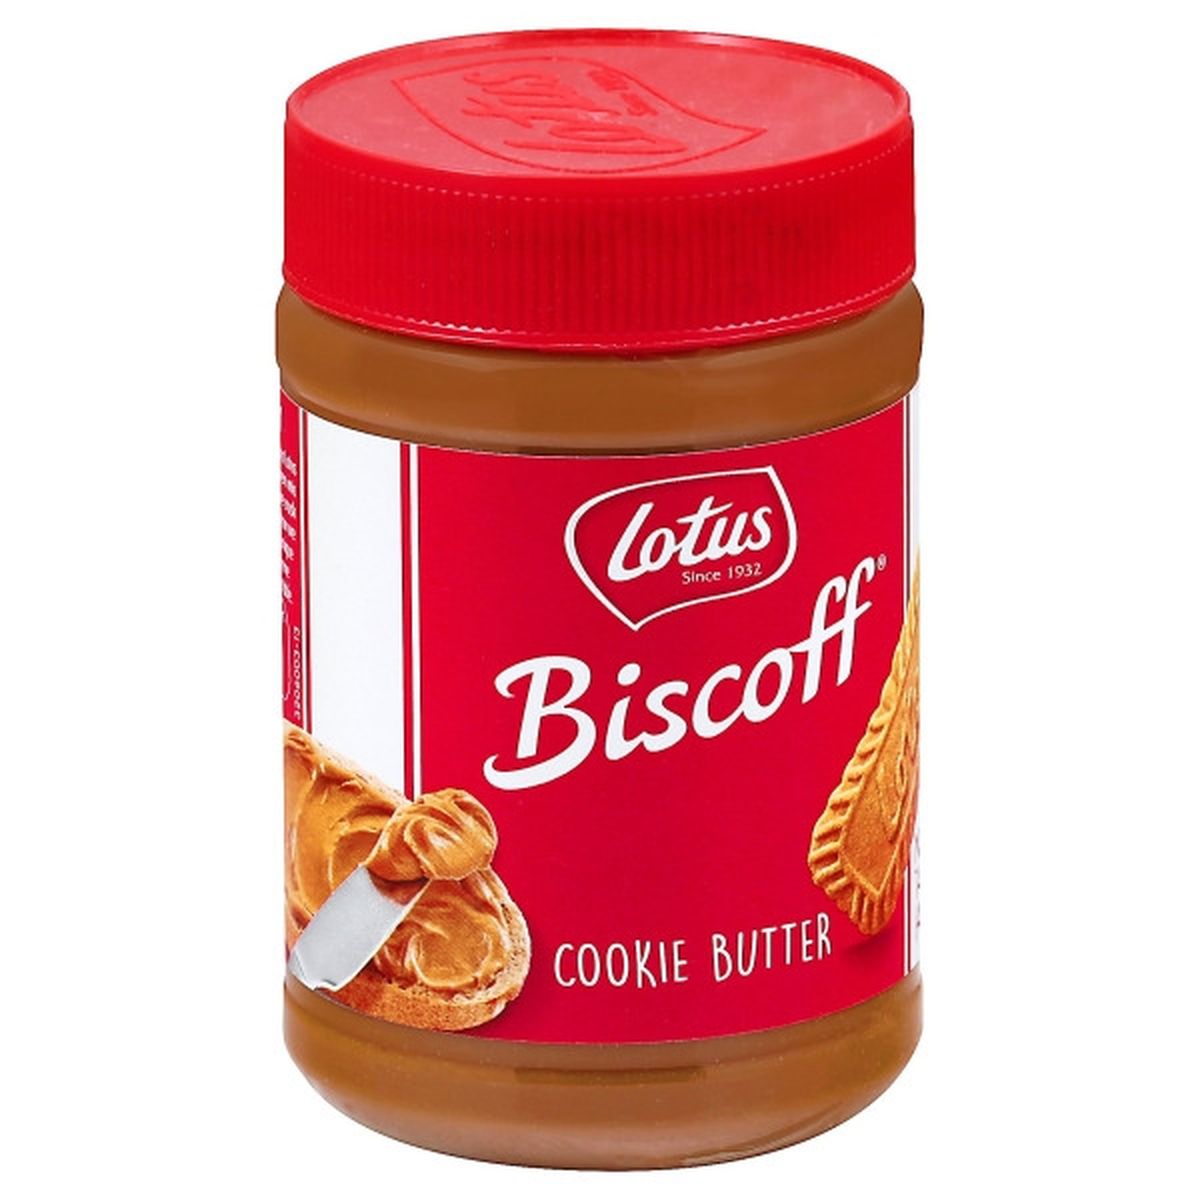 Calories in Lotus Biscoff Cookie Butter